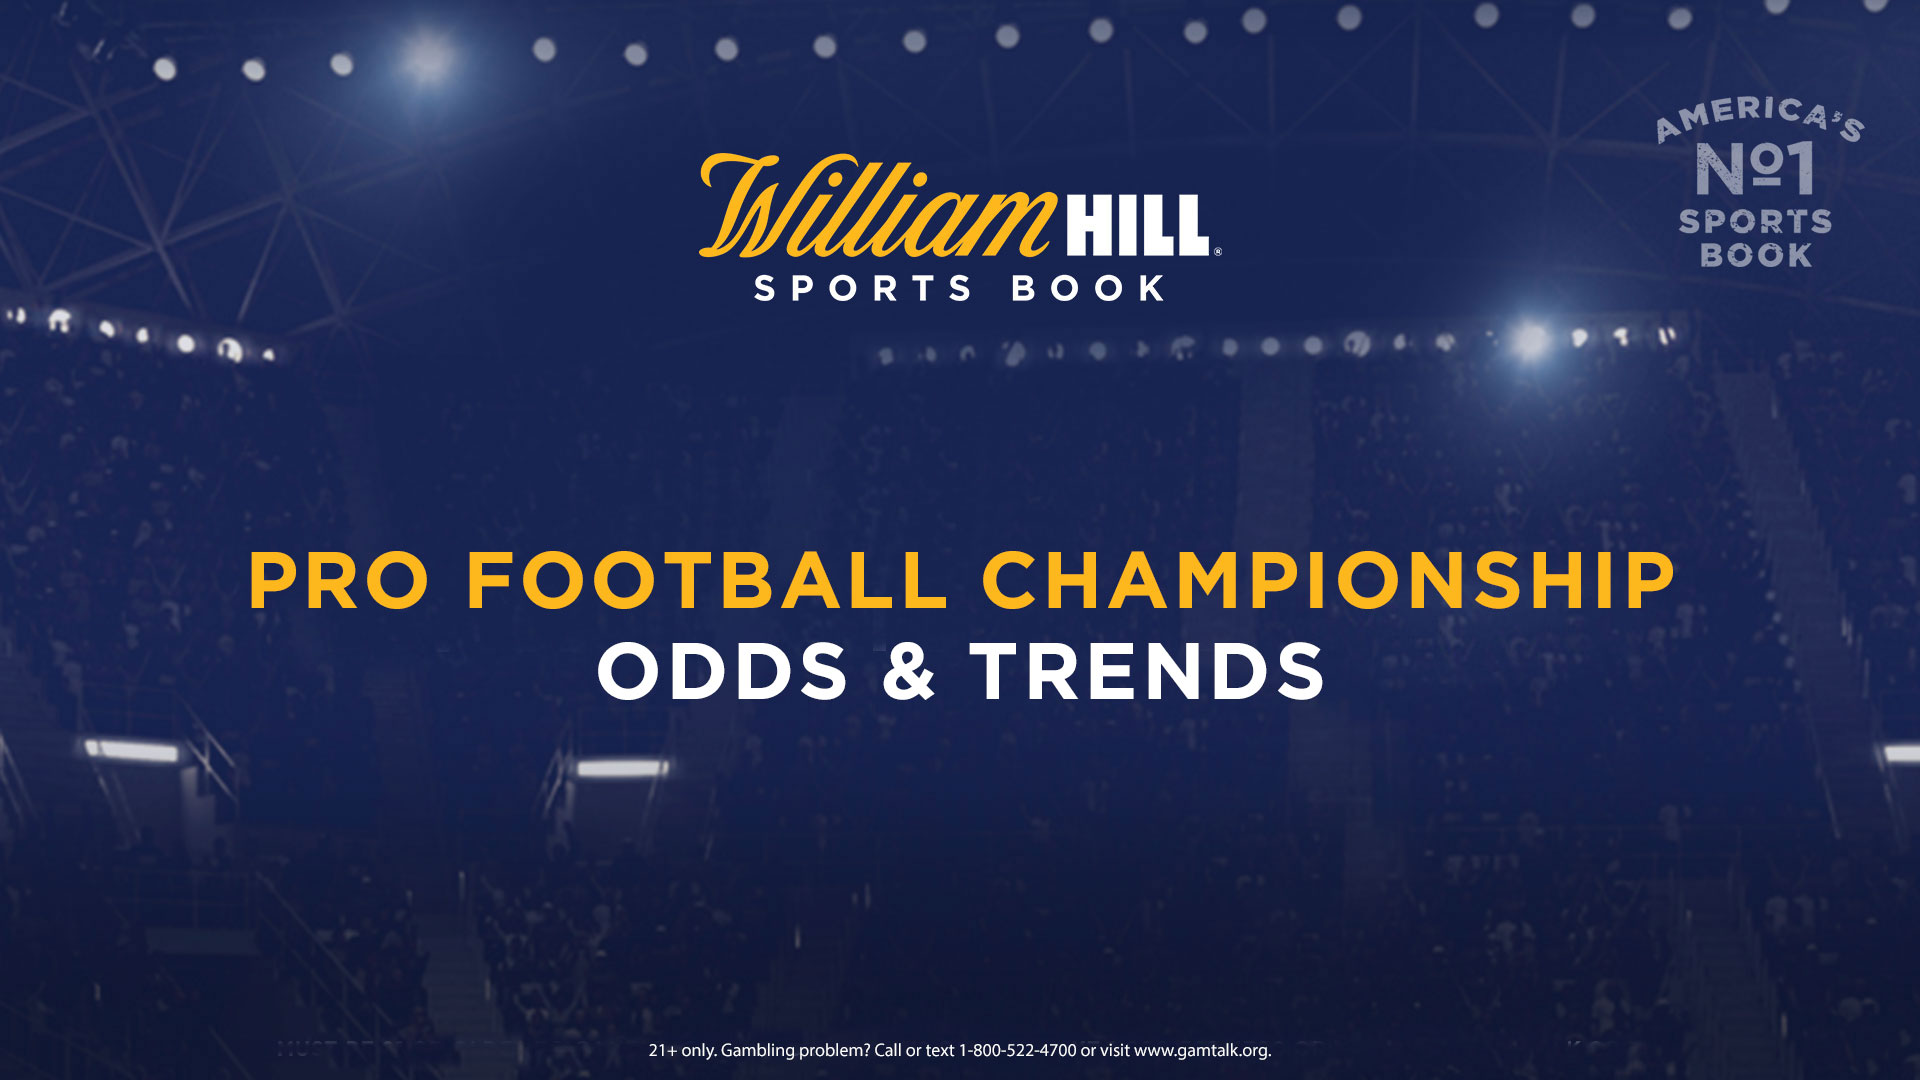 Super Bowl Betting Trends & Futures Odds Report